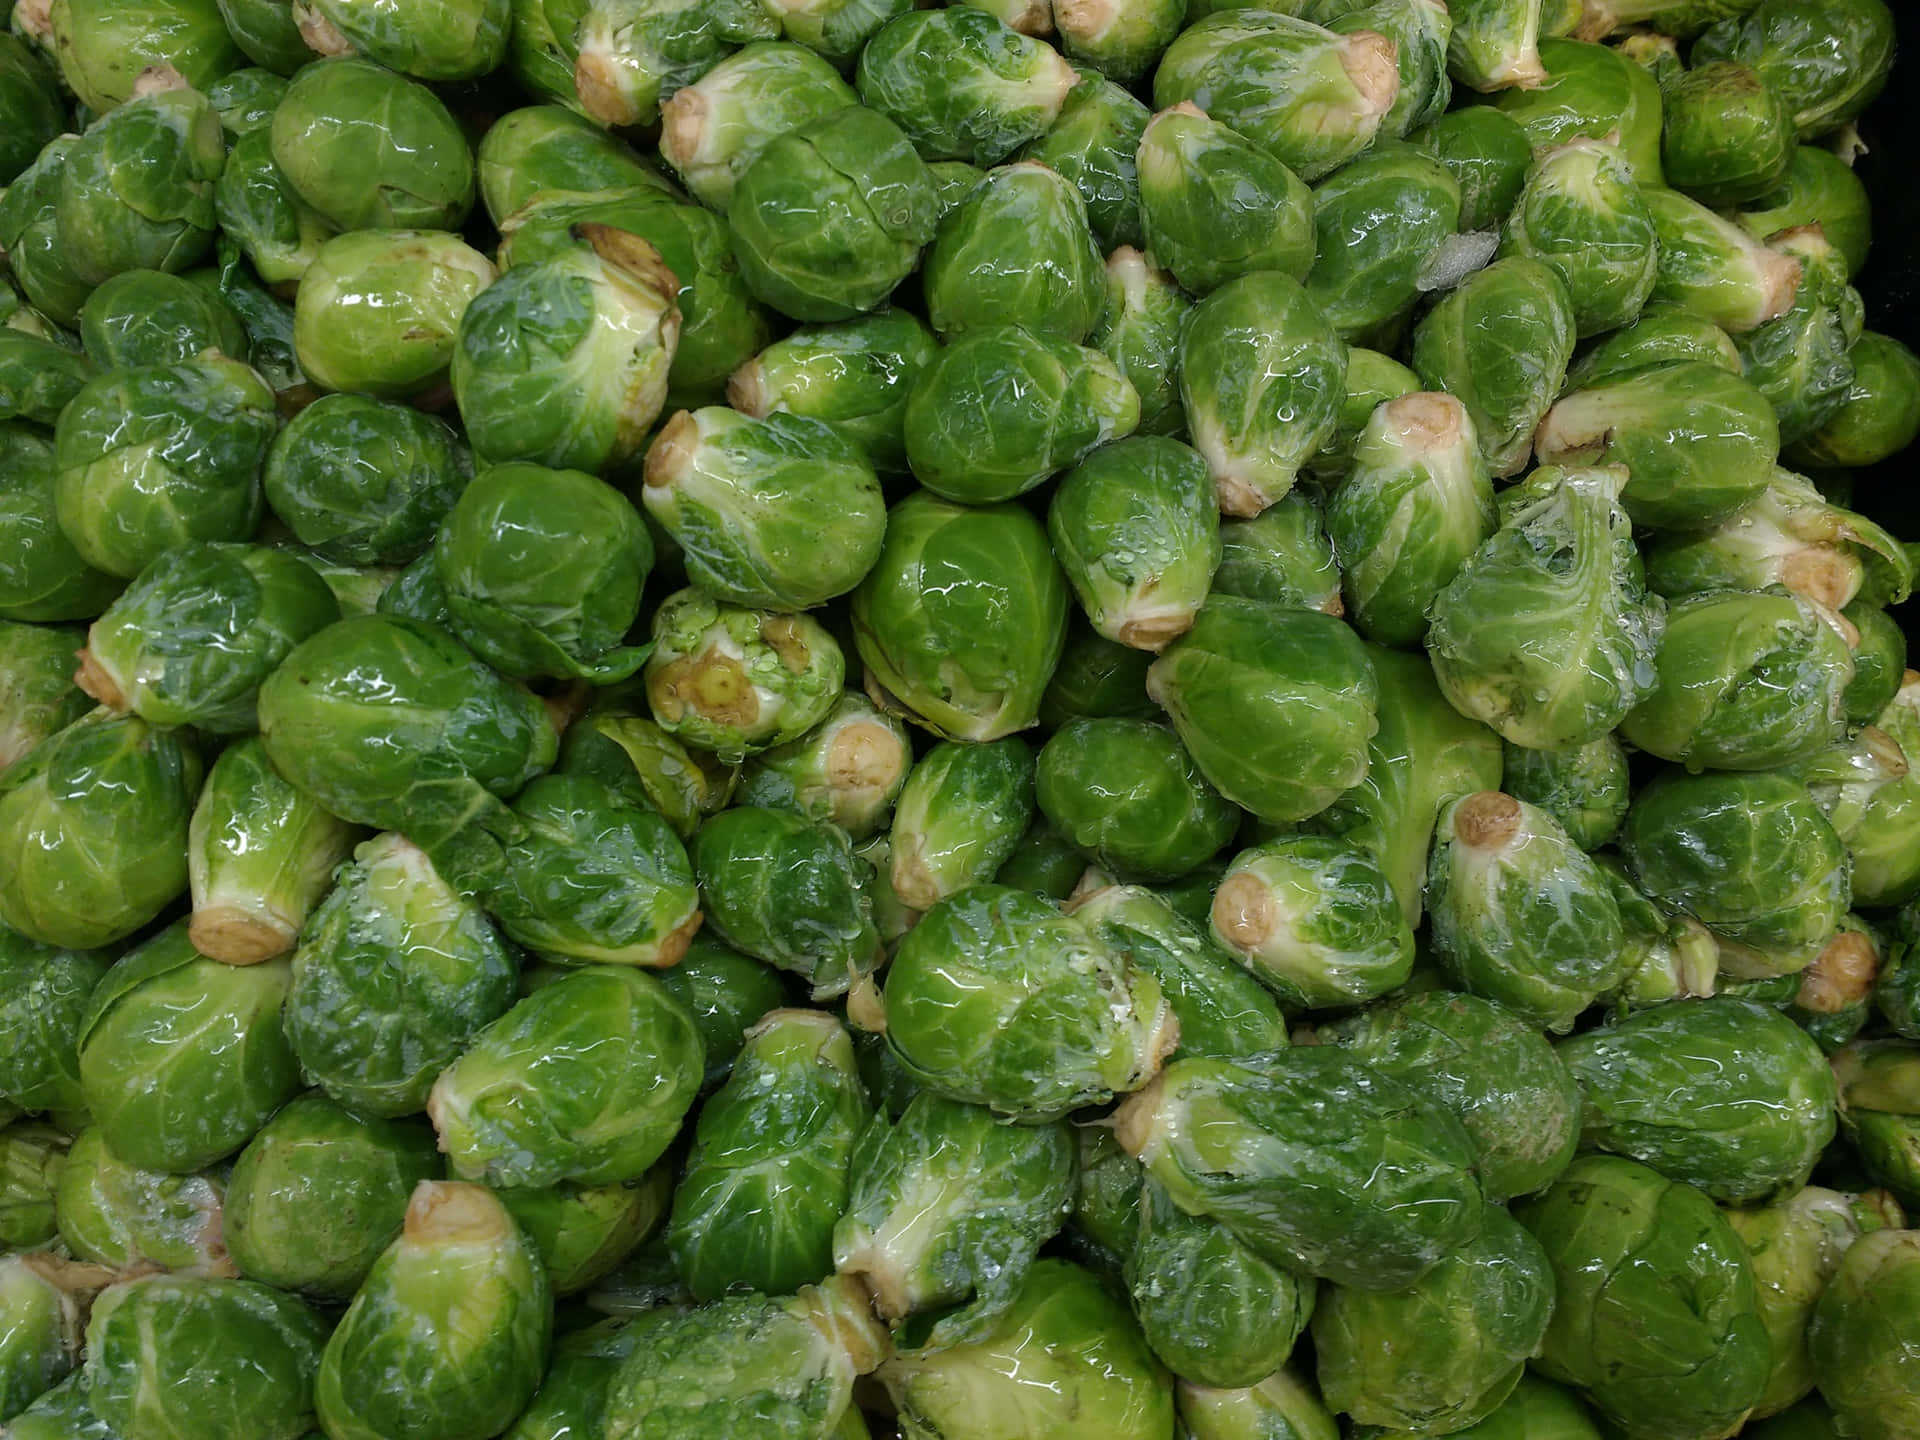 Brussel Sprouts At The Market